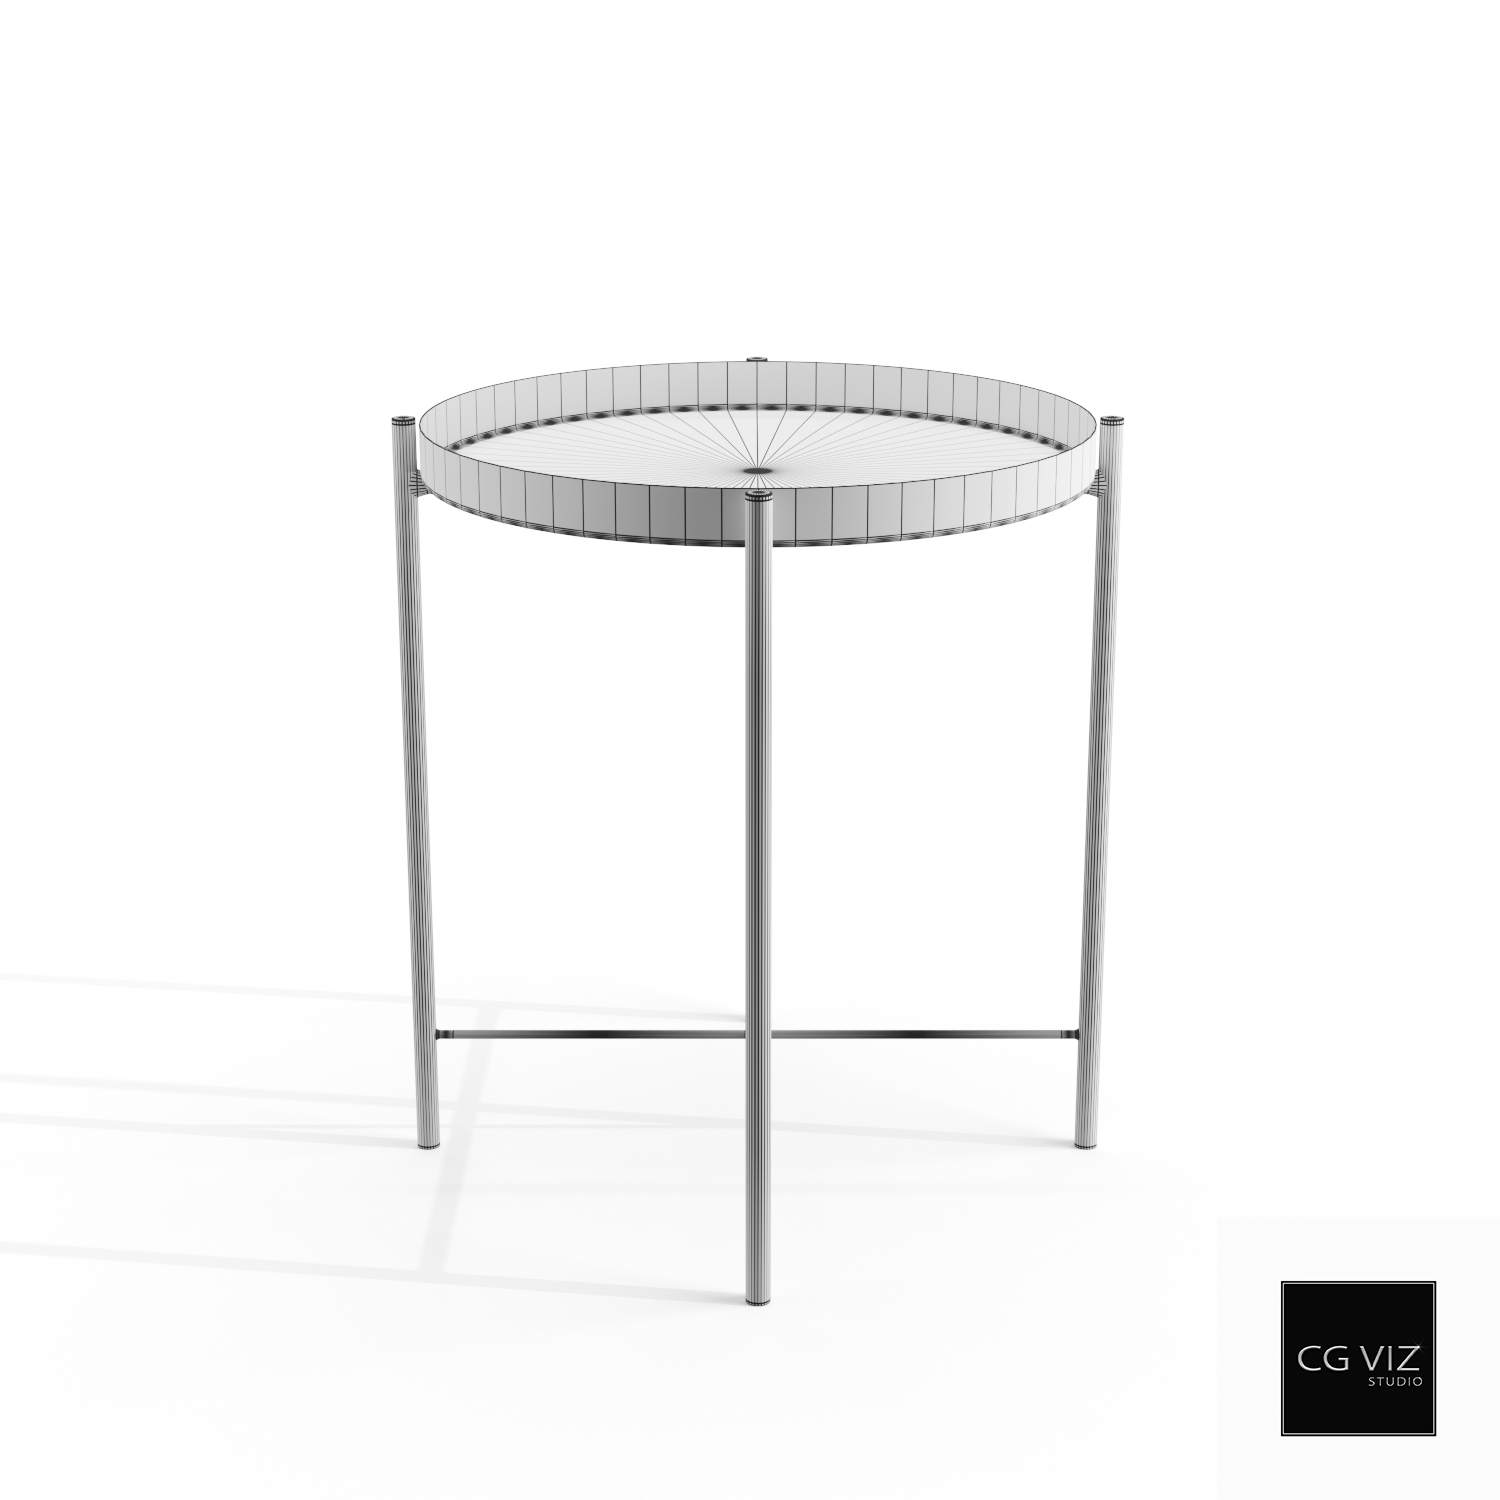 Wireframe View of IKEA Tray Table 3D Model by CG Viz Studio